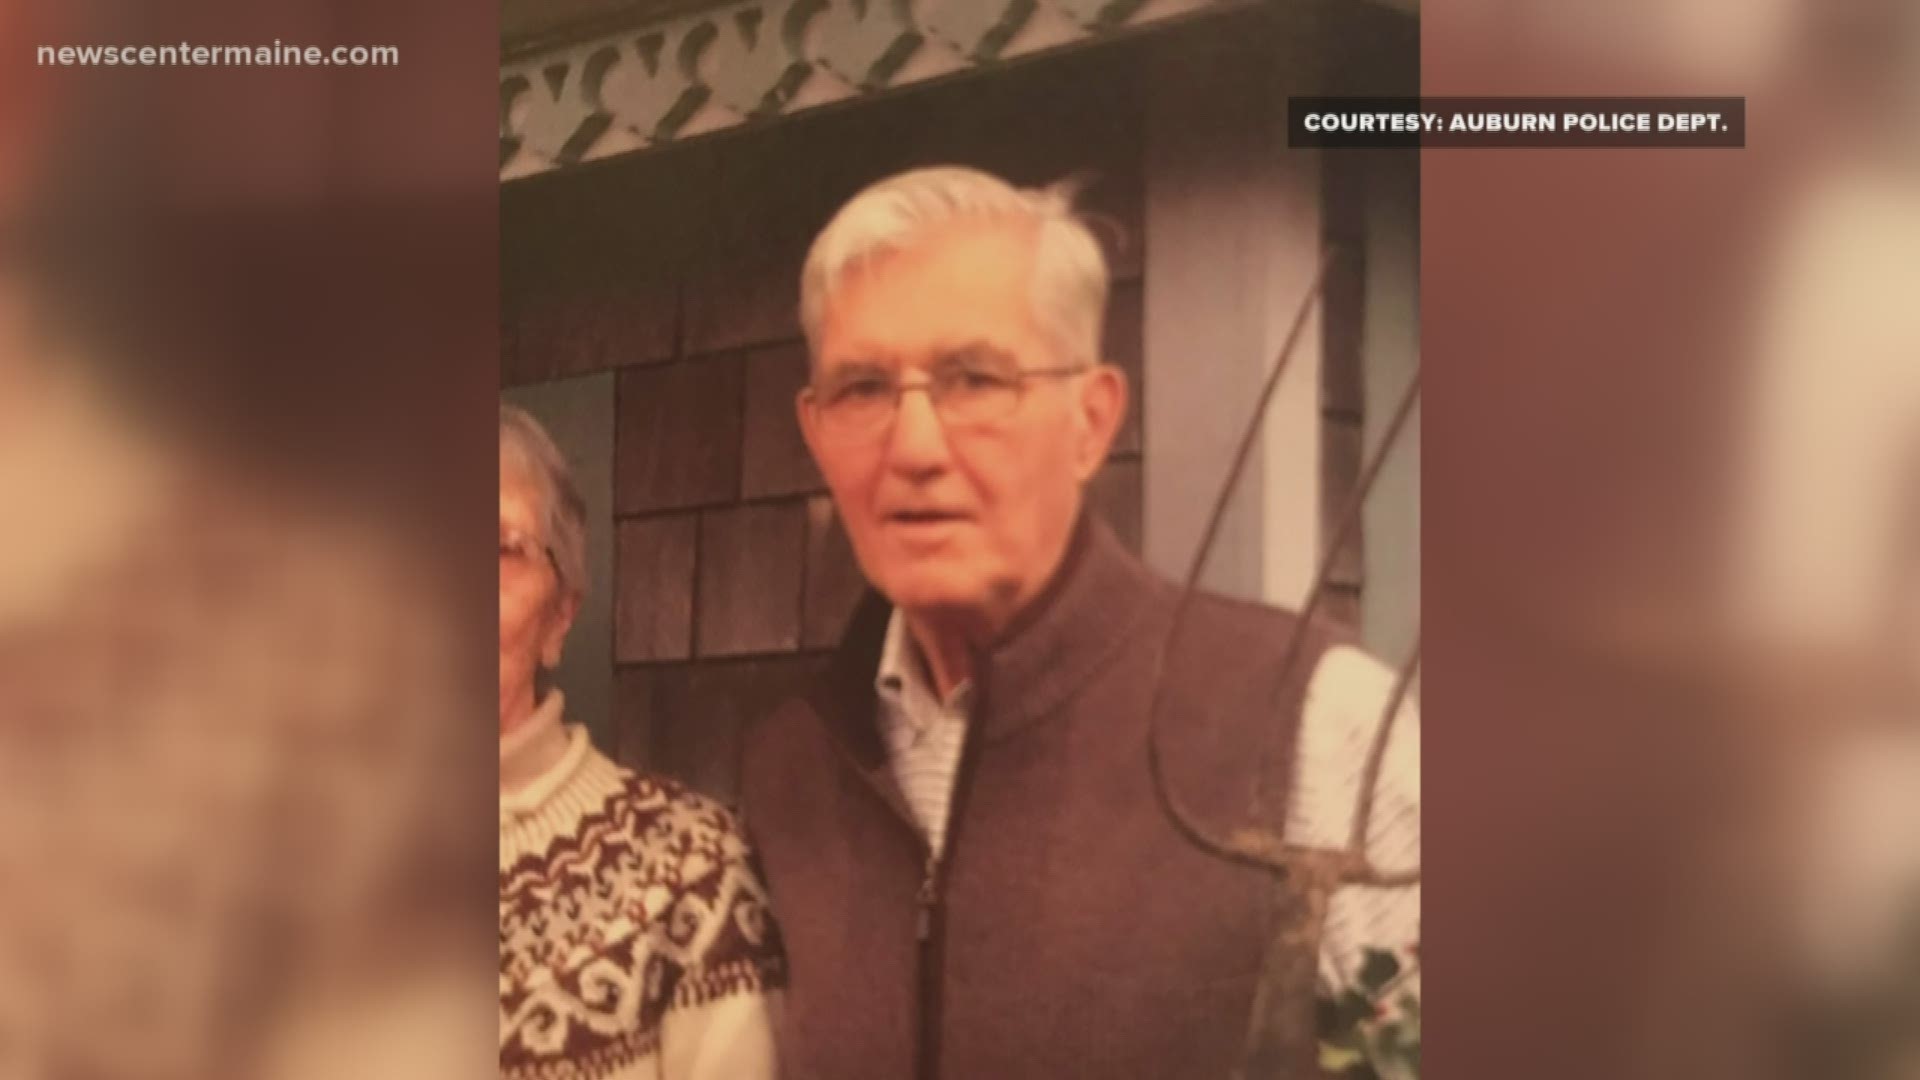 Auburn Police are asking for help locating, Richard "Dick" Bastow, missing from Auburn.